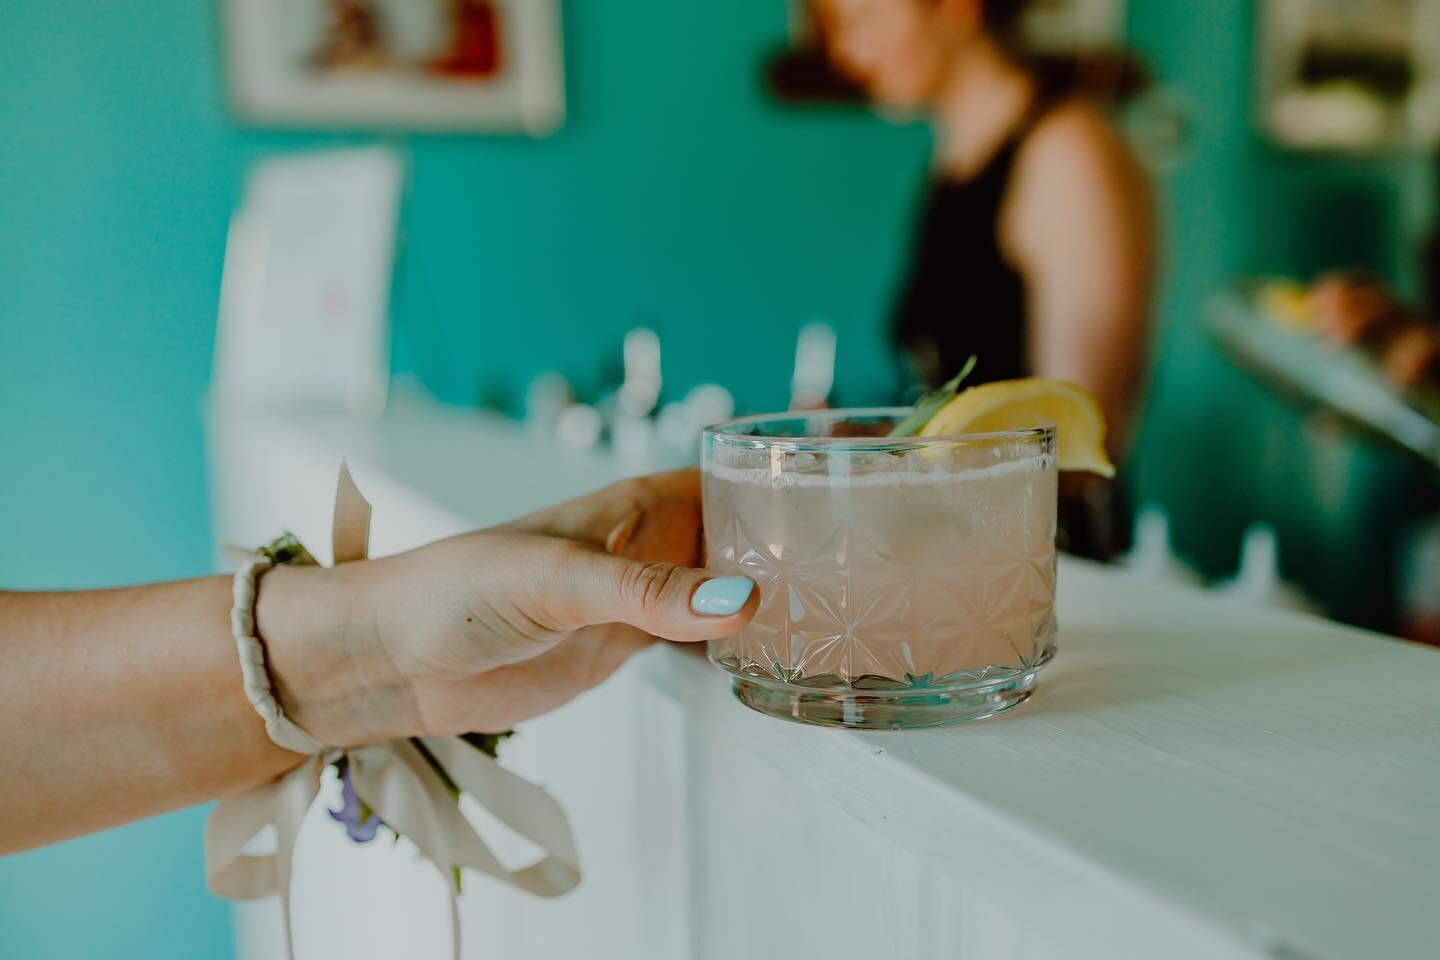 I&rsquo;m on day 3 of gnarly heat exhaustion recovery (thank you liquid IV), so here&rsquo;s a little reminder to put your cocktails in fancy glasses and get pictures 🍹

@lisawoodsphotography 
@smokinbeautyatx